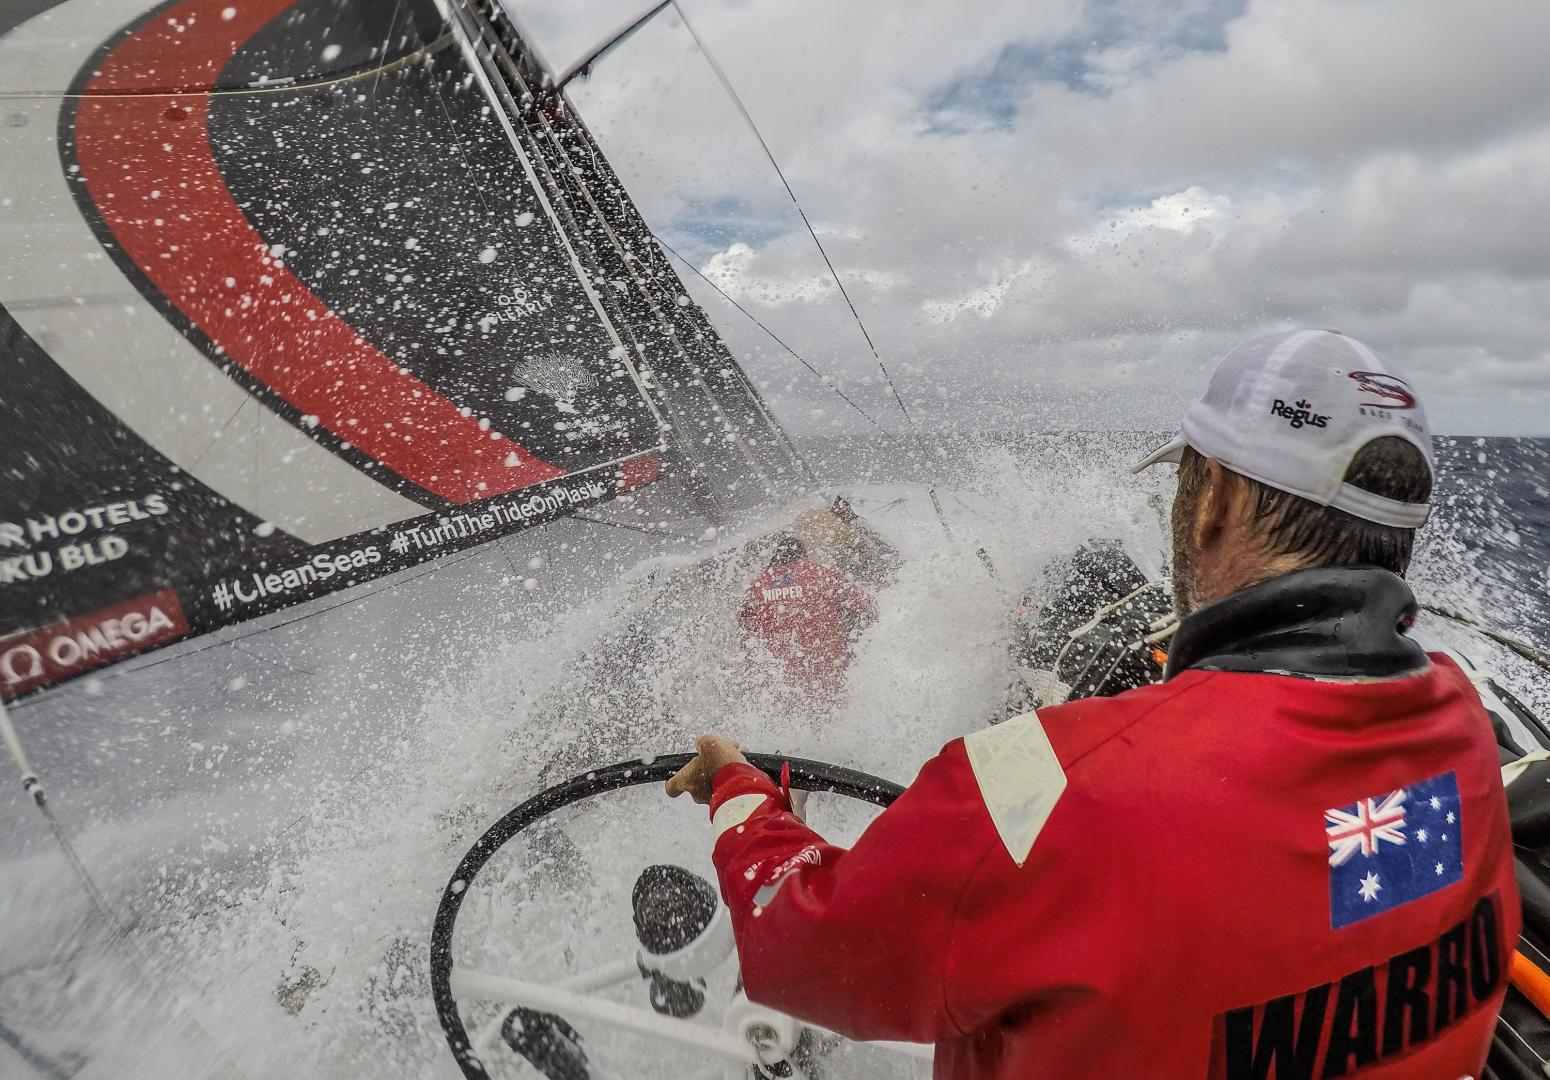 Following a dramatic man overboard recovery on Sunday, Sun Hung Kai/Scallywag retain their lead in the race to Hong Kong